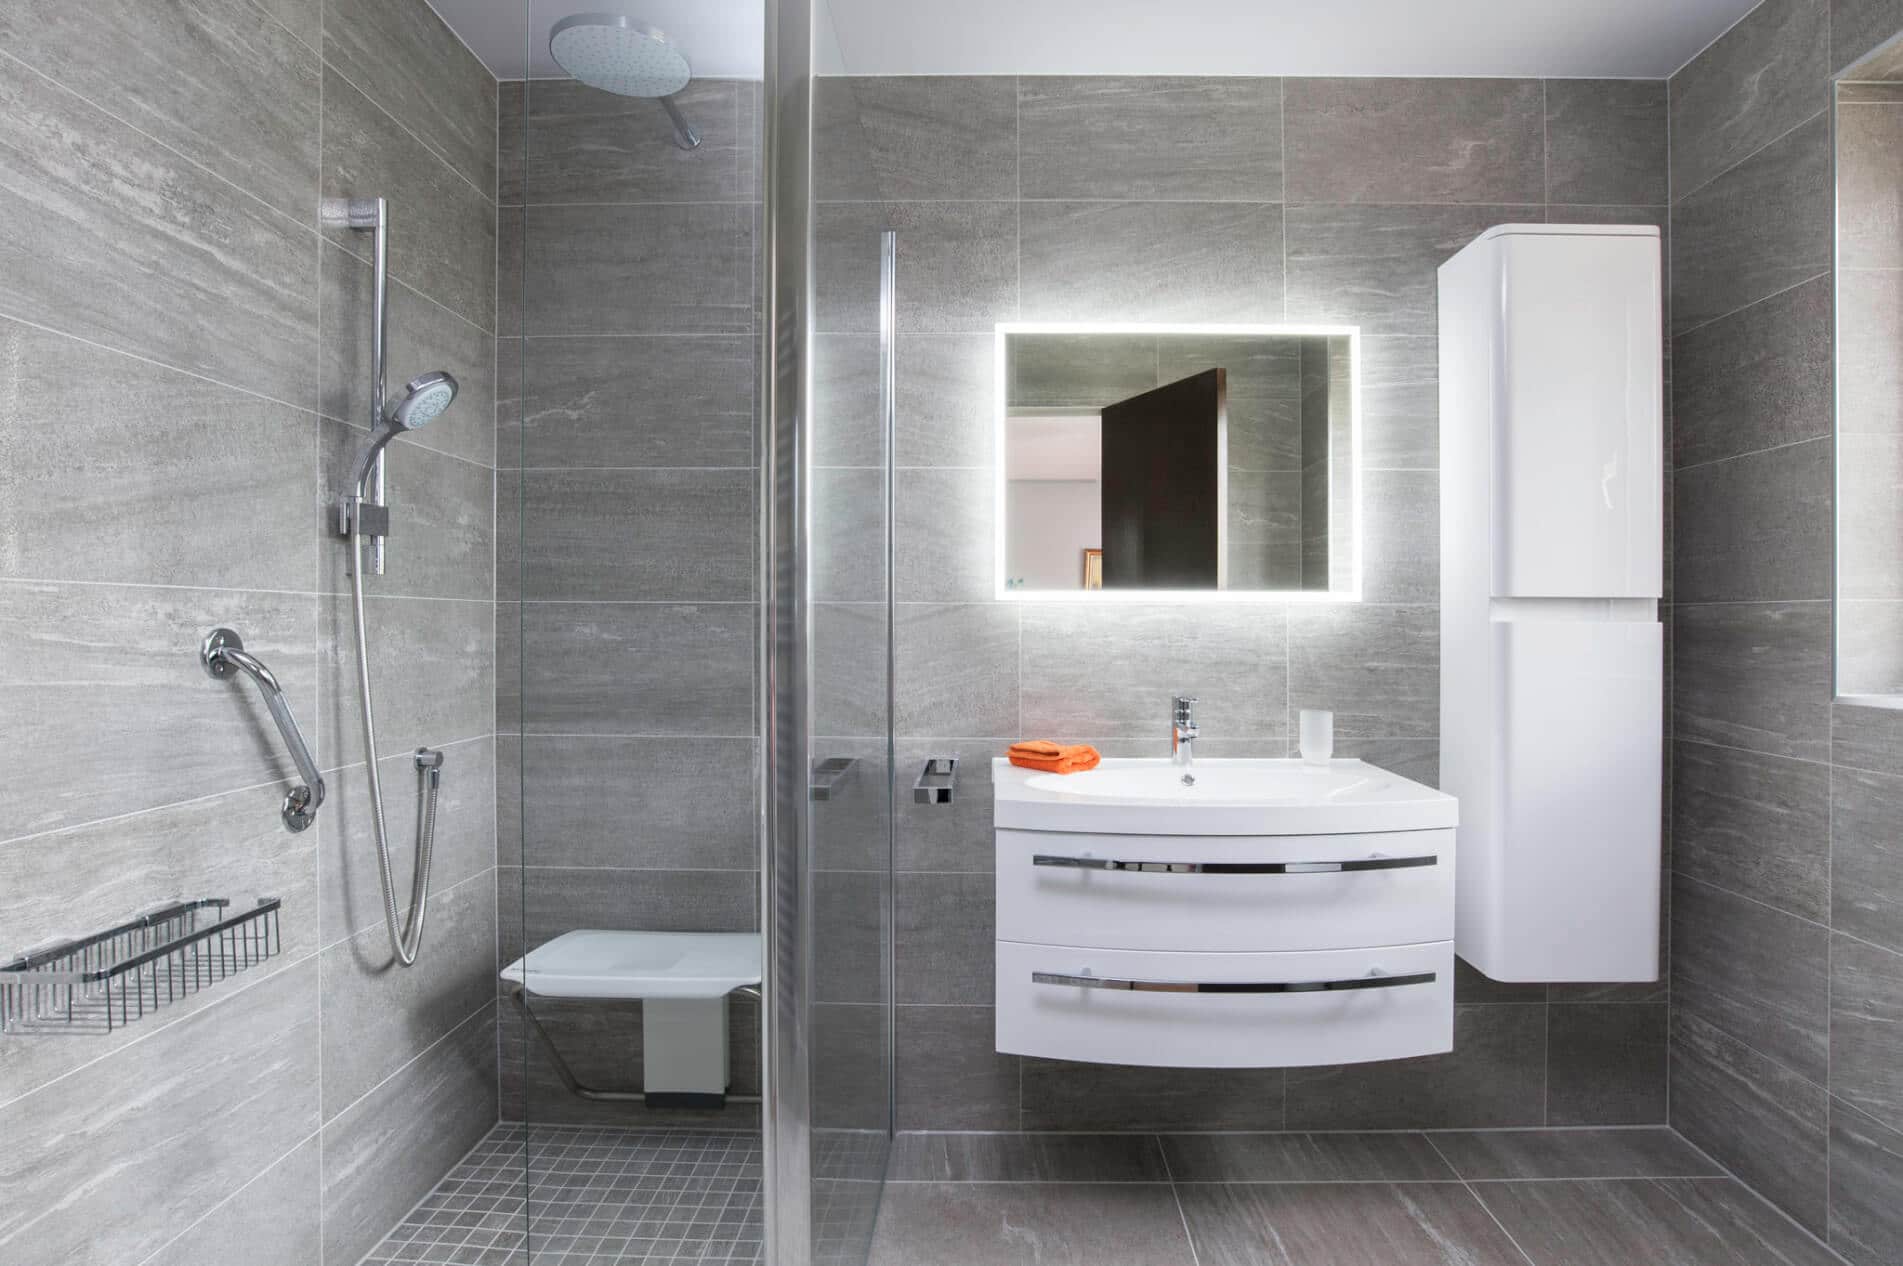 Storage solutions for wet rooms